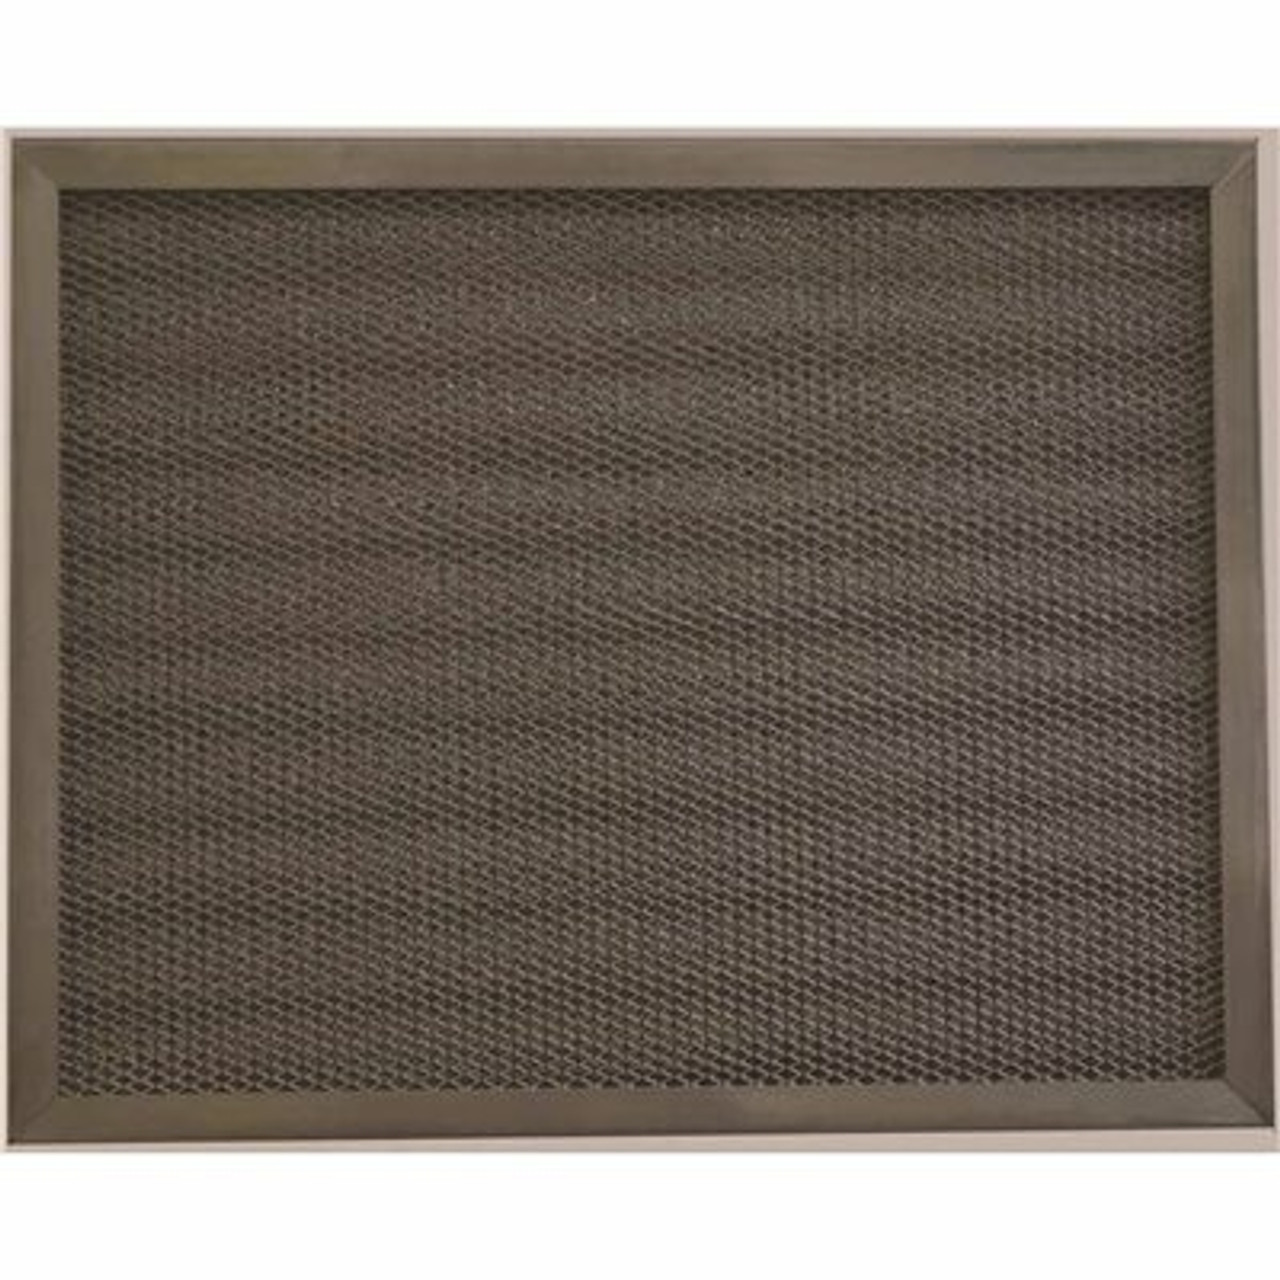 AAF Flanders 16 In. X 25 In. X 1 Washabale Kkm MERV 4 Air Filter With Aluminum Frame (Case Of 6)